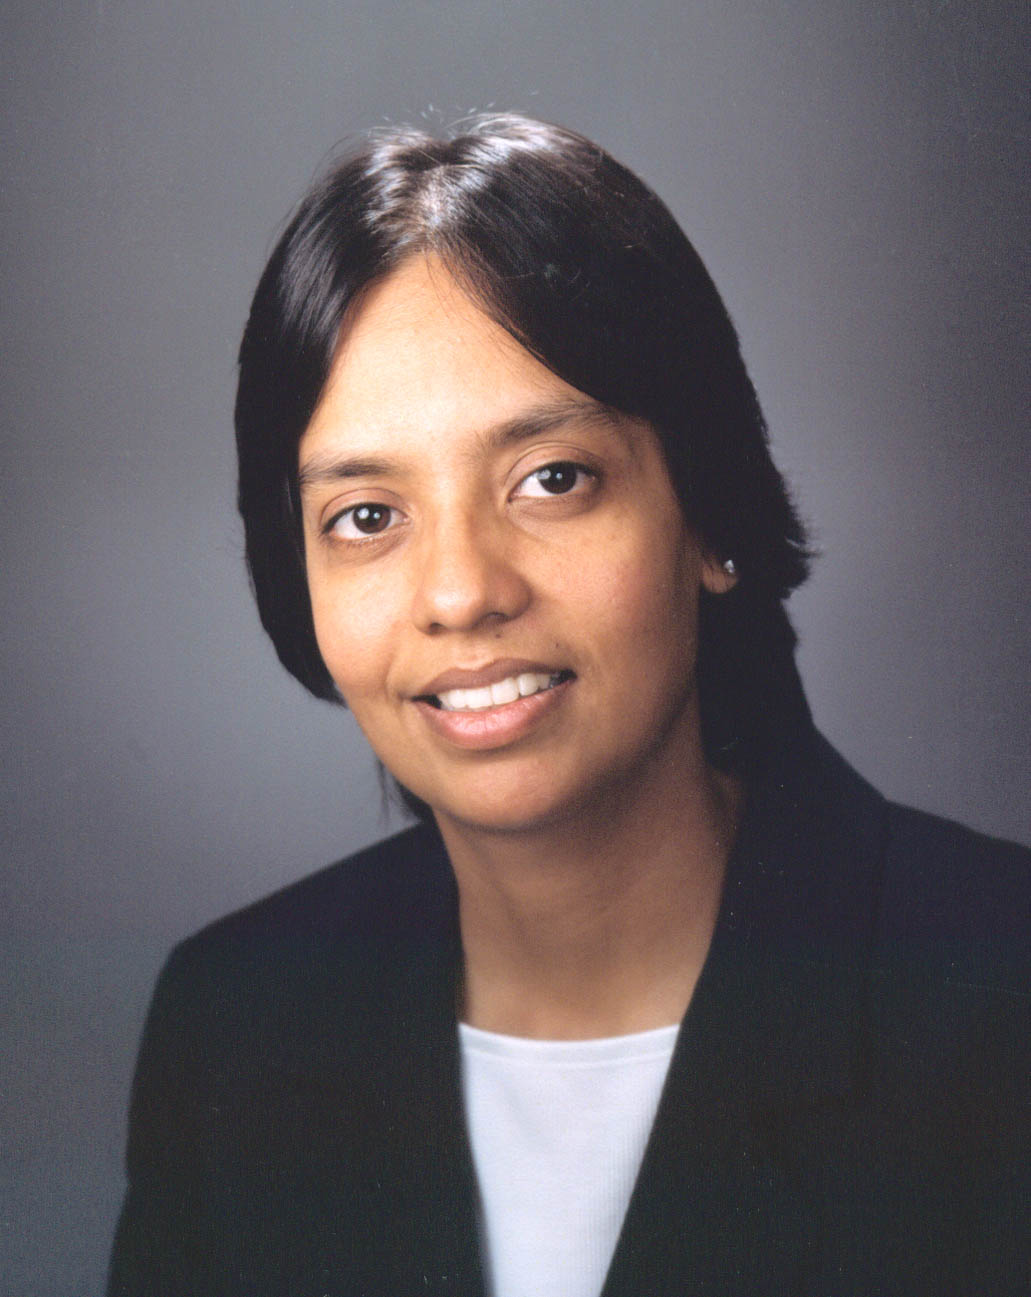 Mangali Shastry, MD - An Independent Provider of Memorial Healthcare